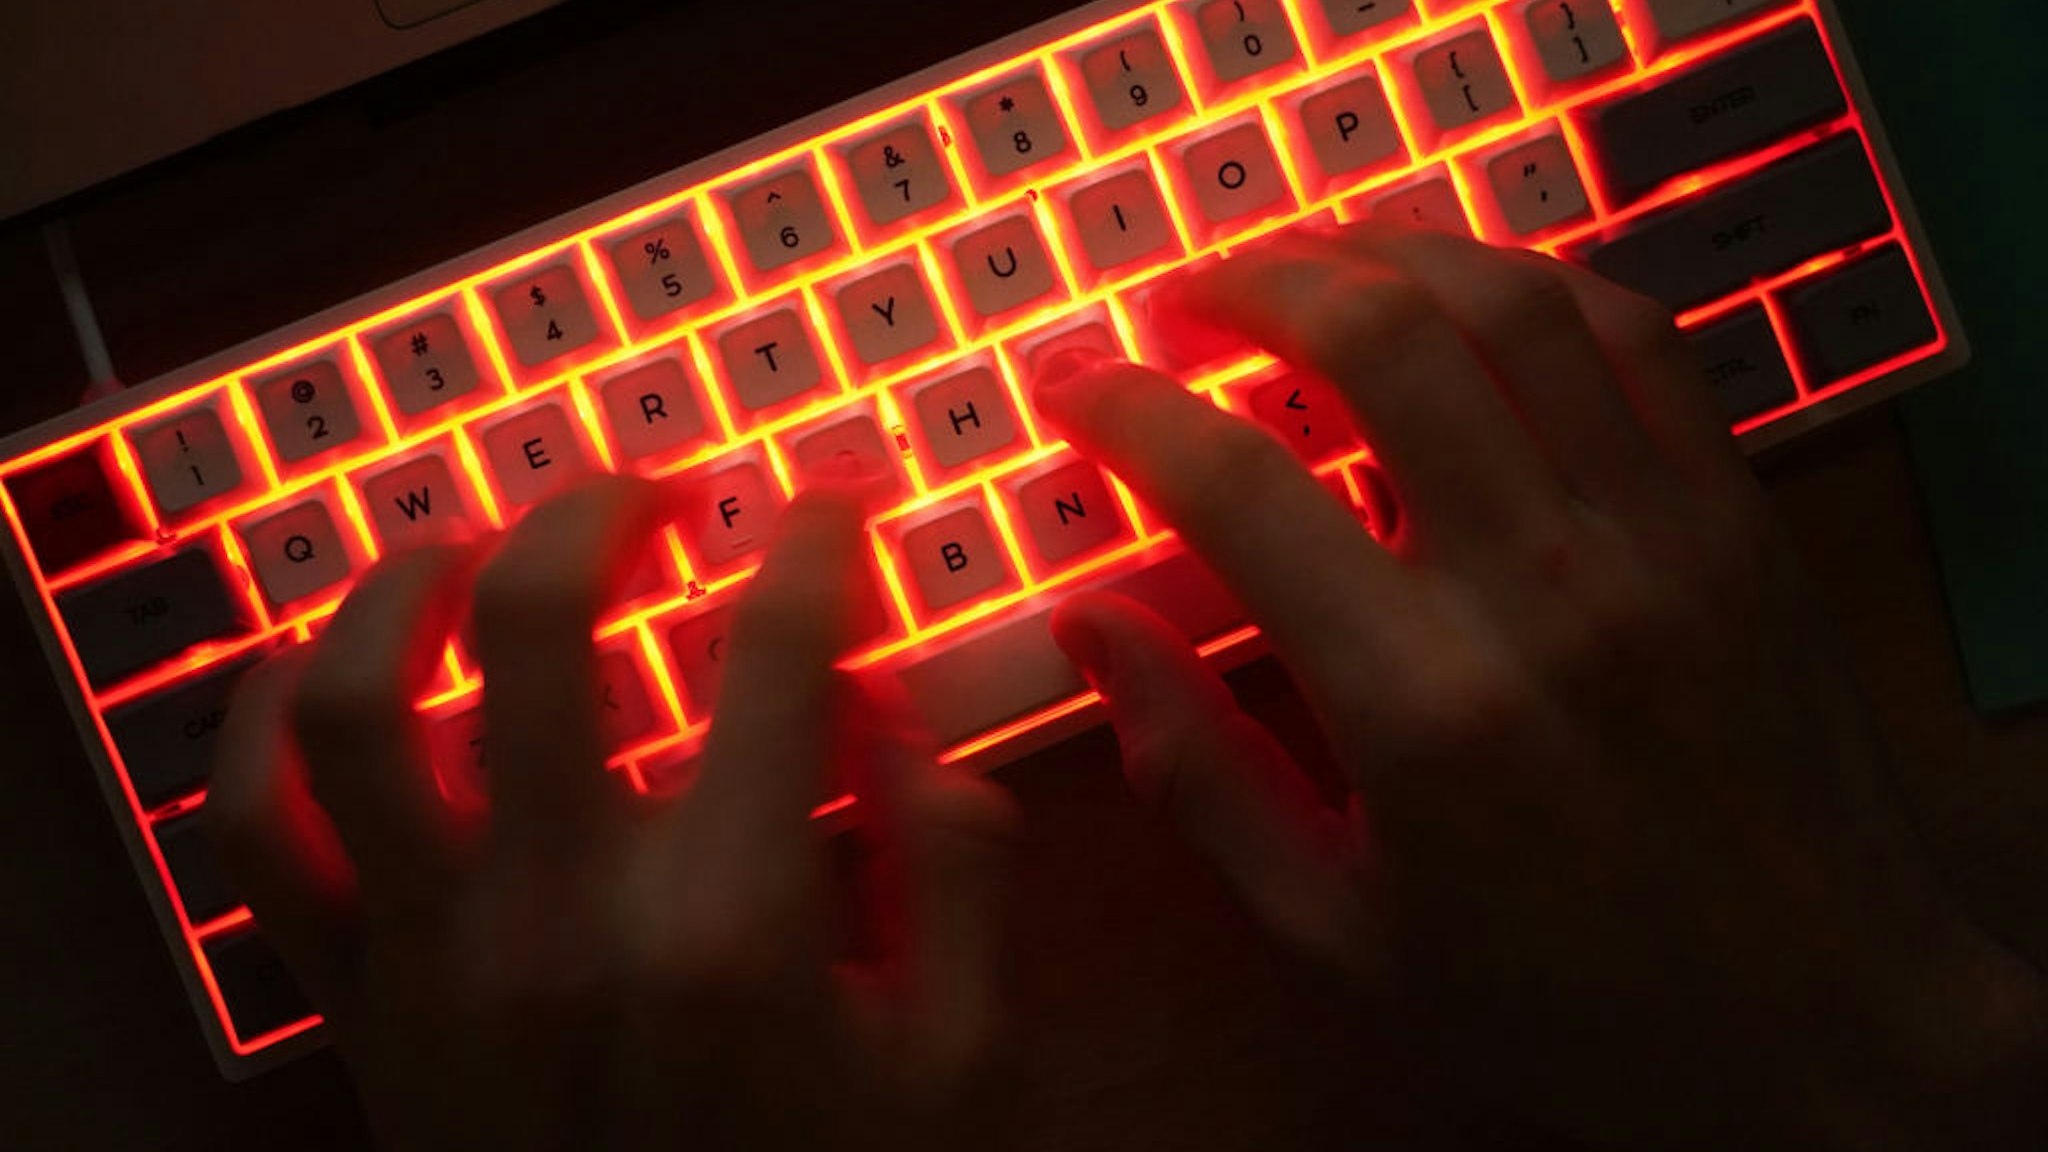 BERLIN, GERMANY - JANUARY 25: In this photo illustration a young man types on an illuminated computer keyboard typically favored by computer coders on January 25, 2021 in Berlin, Germany. 2020 saw a sharp rise in global cybercrime that was in part driven by the jump in online retailing that ensued during national lockdowns as governments sought to rein in the coronavirus pandemic. (Photo by Sean Gallup/Getty Images)